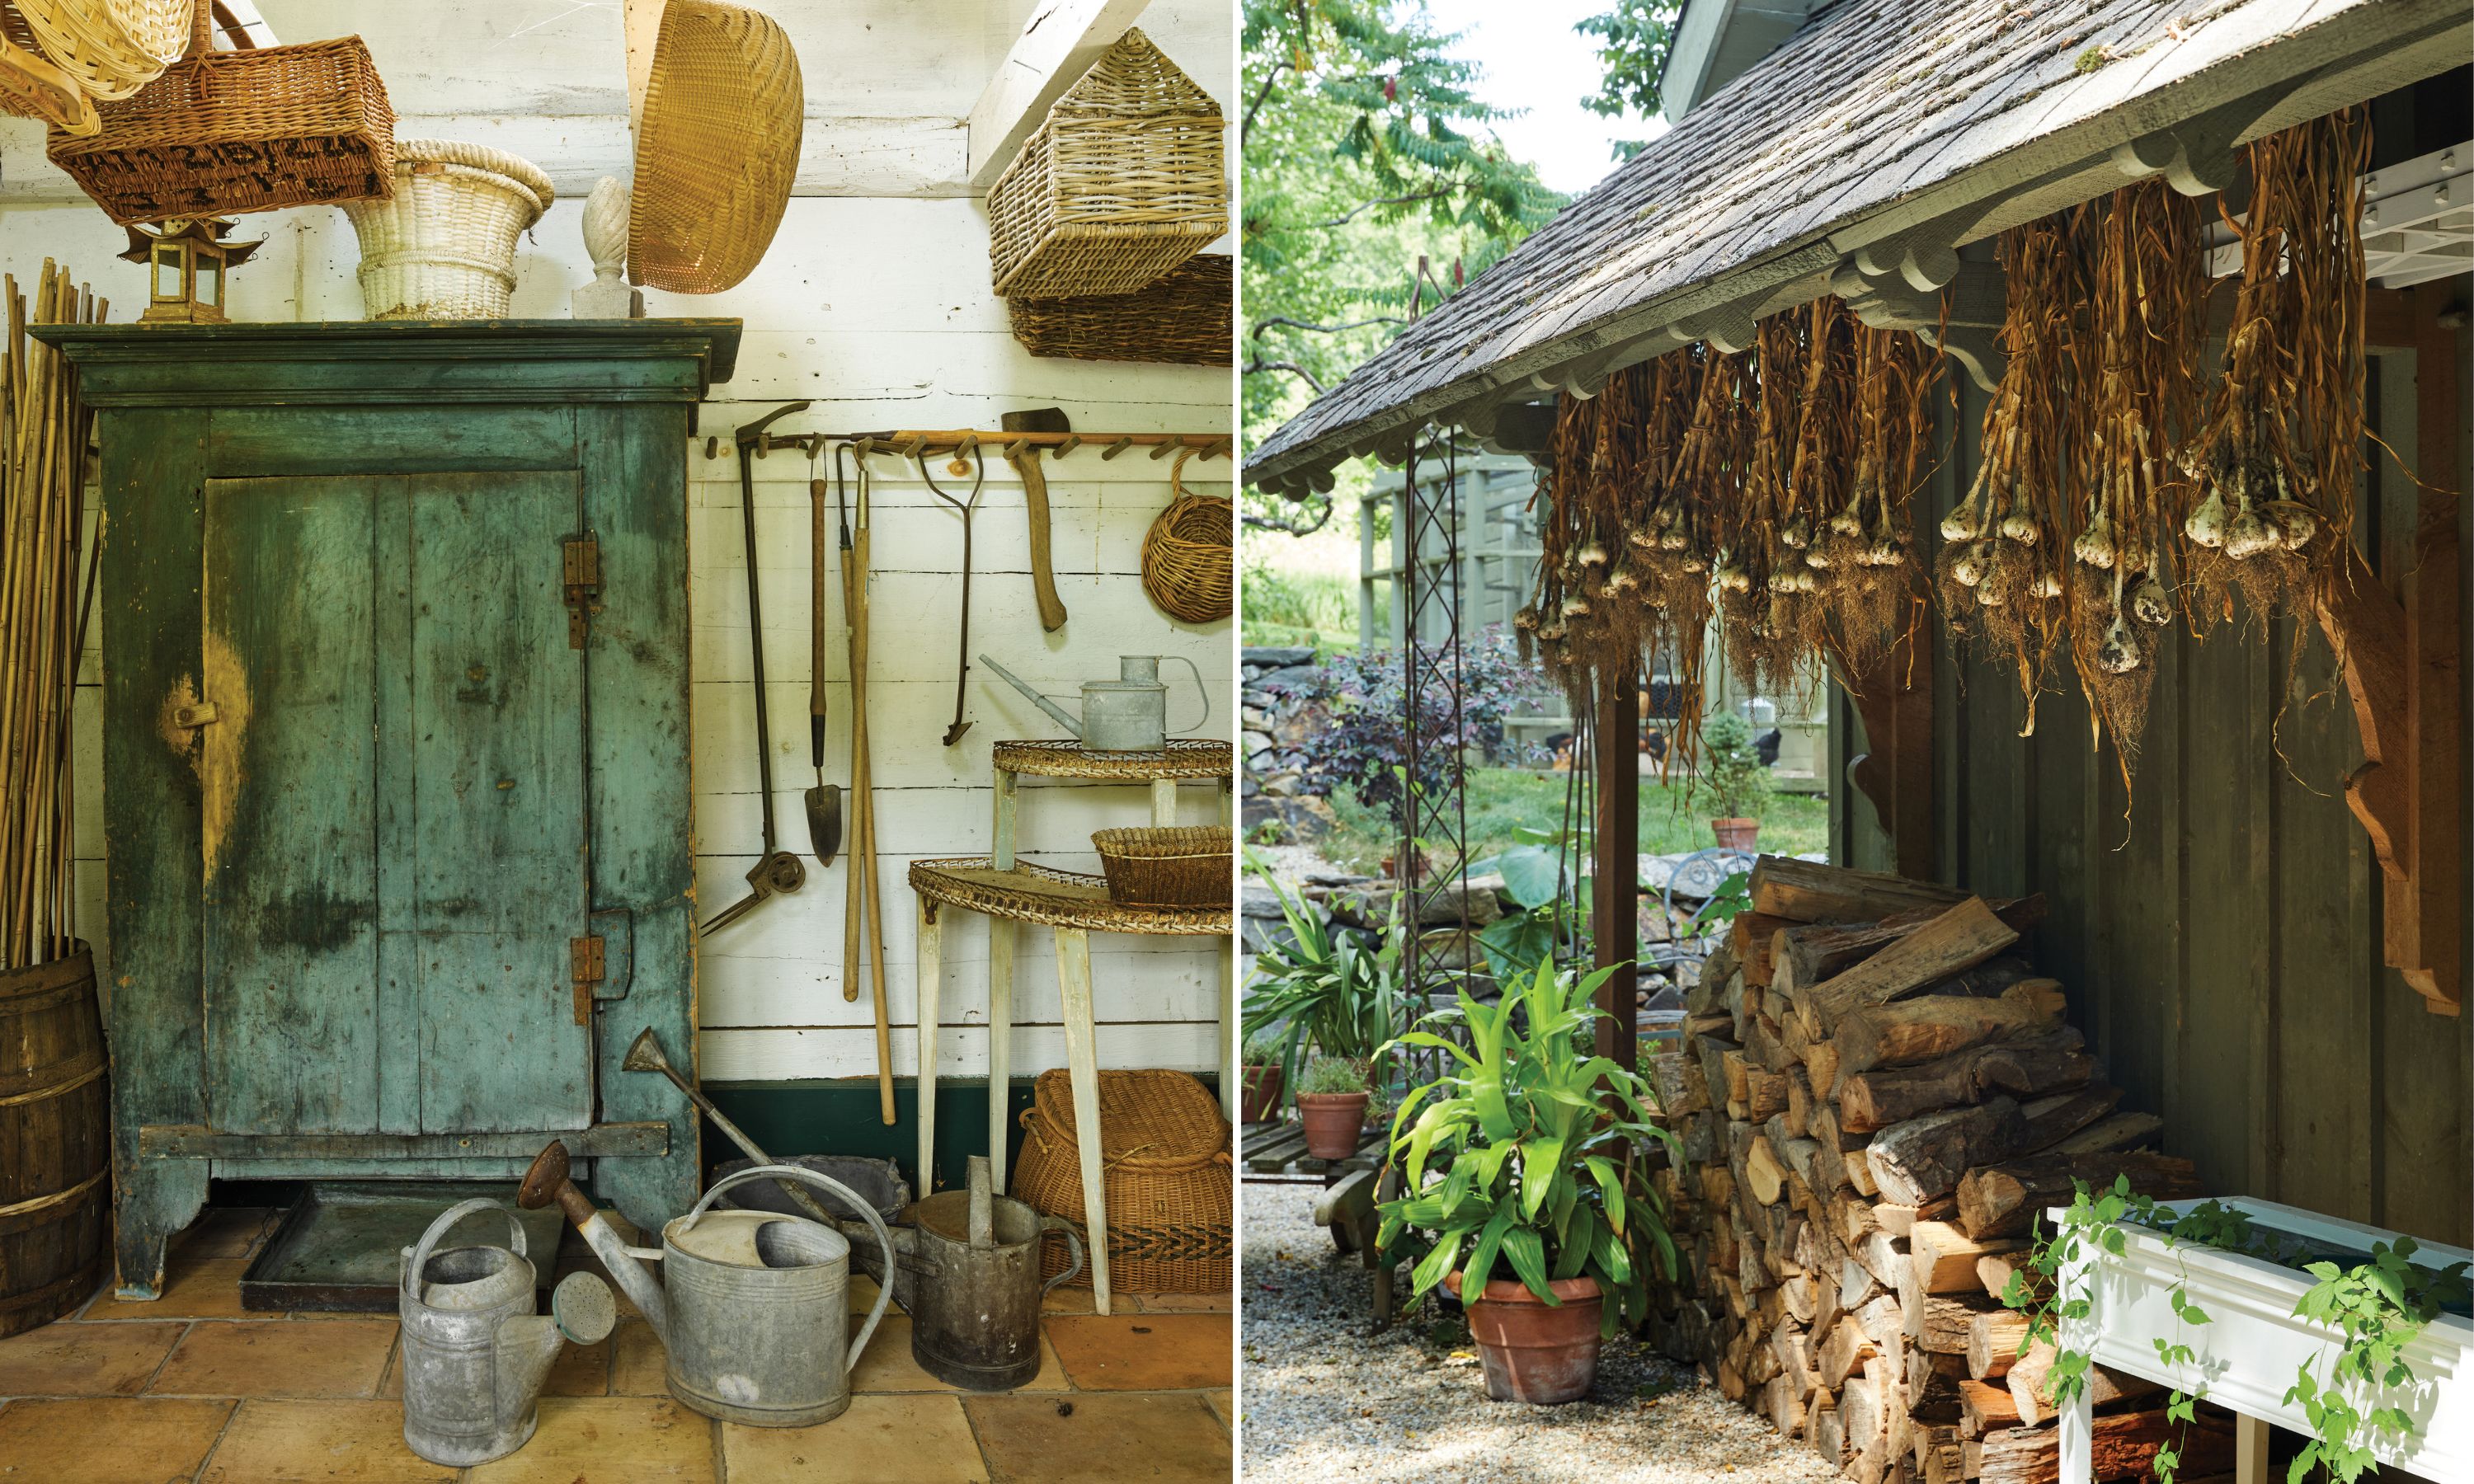 Inside a shed with wicker baskets and a watering can; A garden shed with garlic, freshly harvested, hanging from the roof.